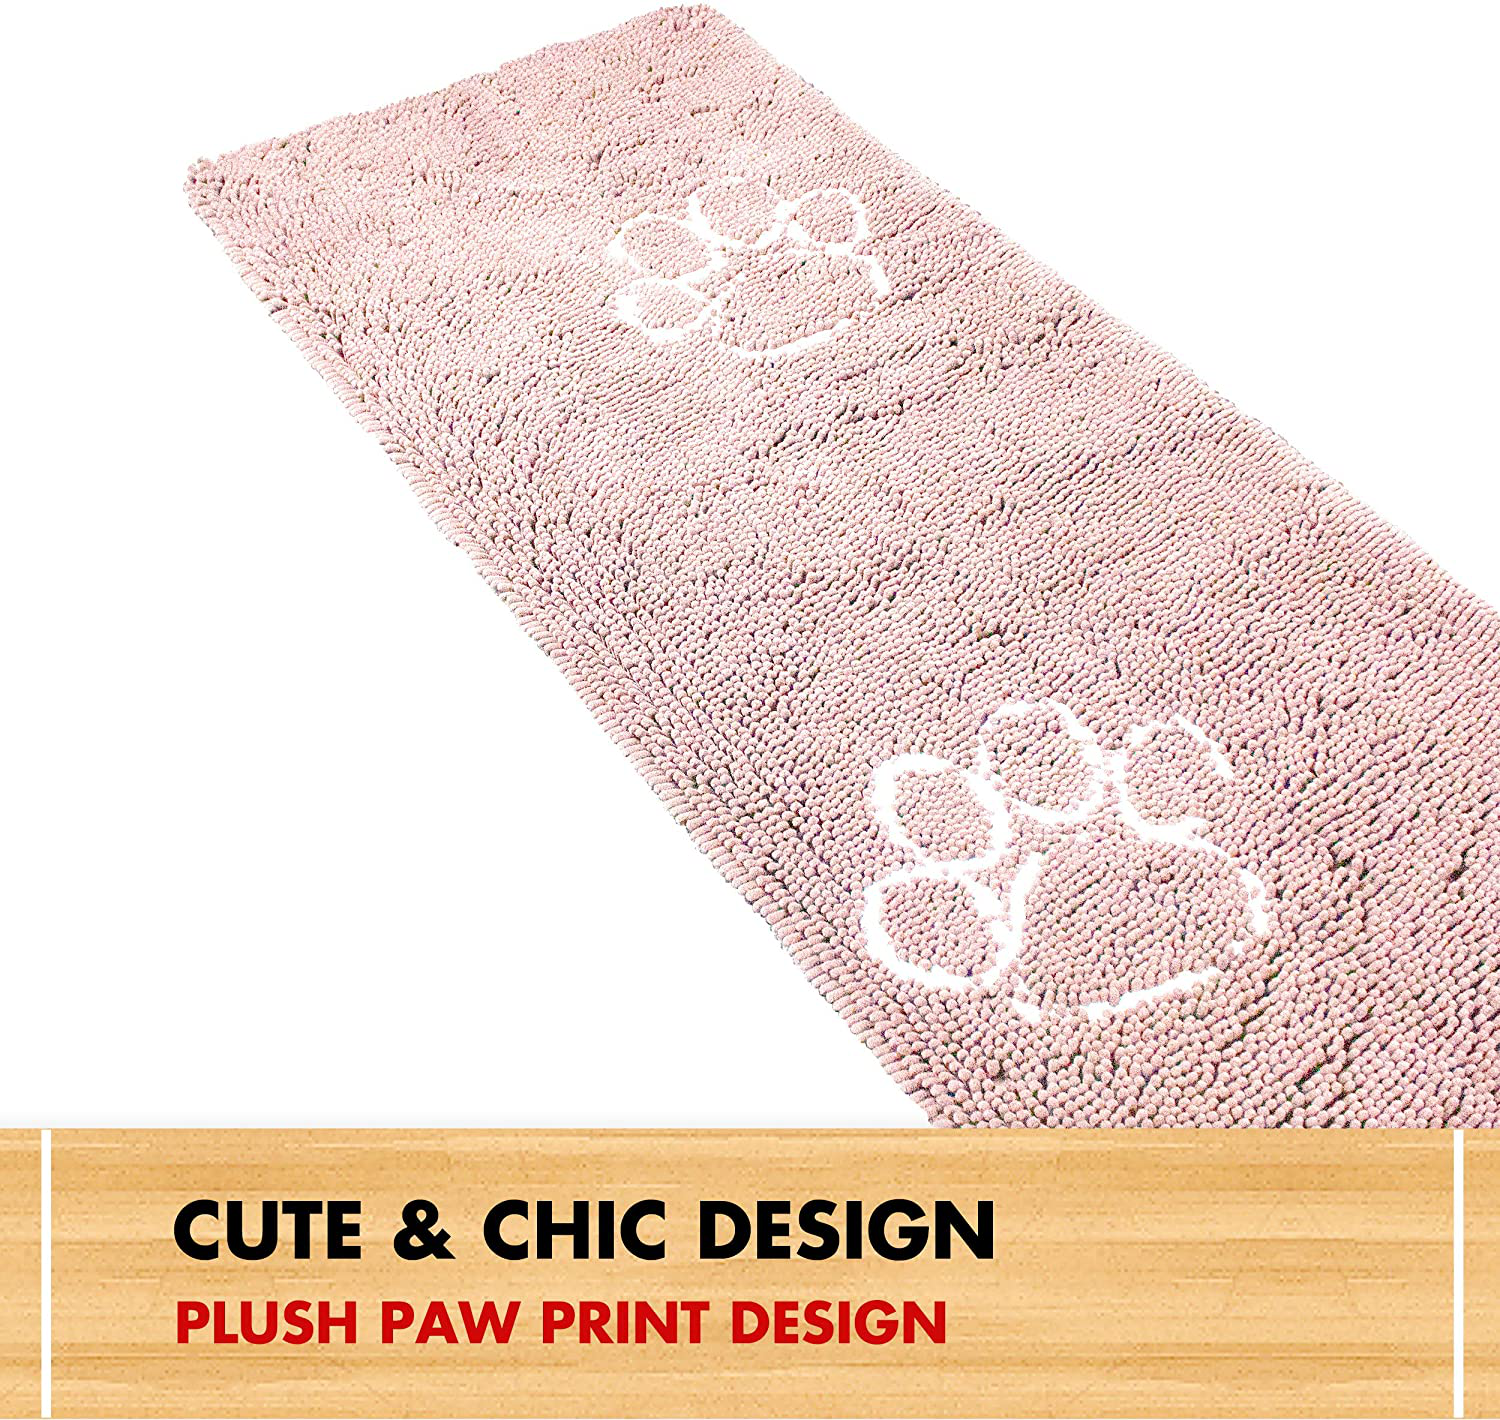 My Doggy Place - Ultra Absorbent Microfiber Dog Door Mat, Durable, Quick Drying, Washable, Prevent Mud Dirt, Keep Your House Clean (Pink W/Paw Print, Hallway Runner) - 8' X 2' Feet